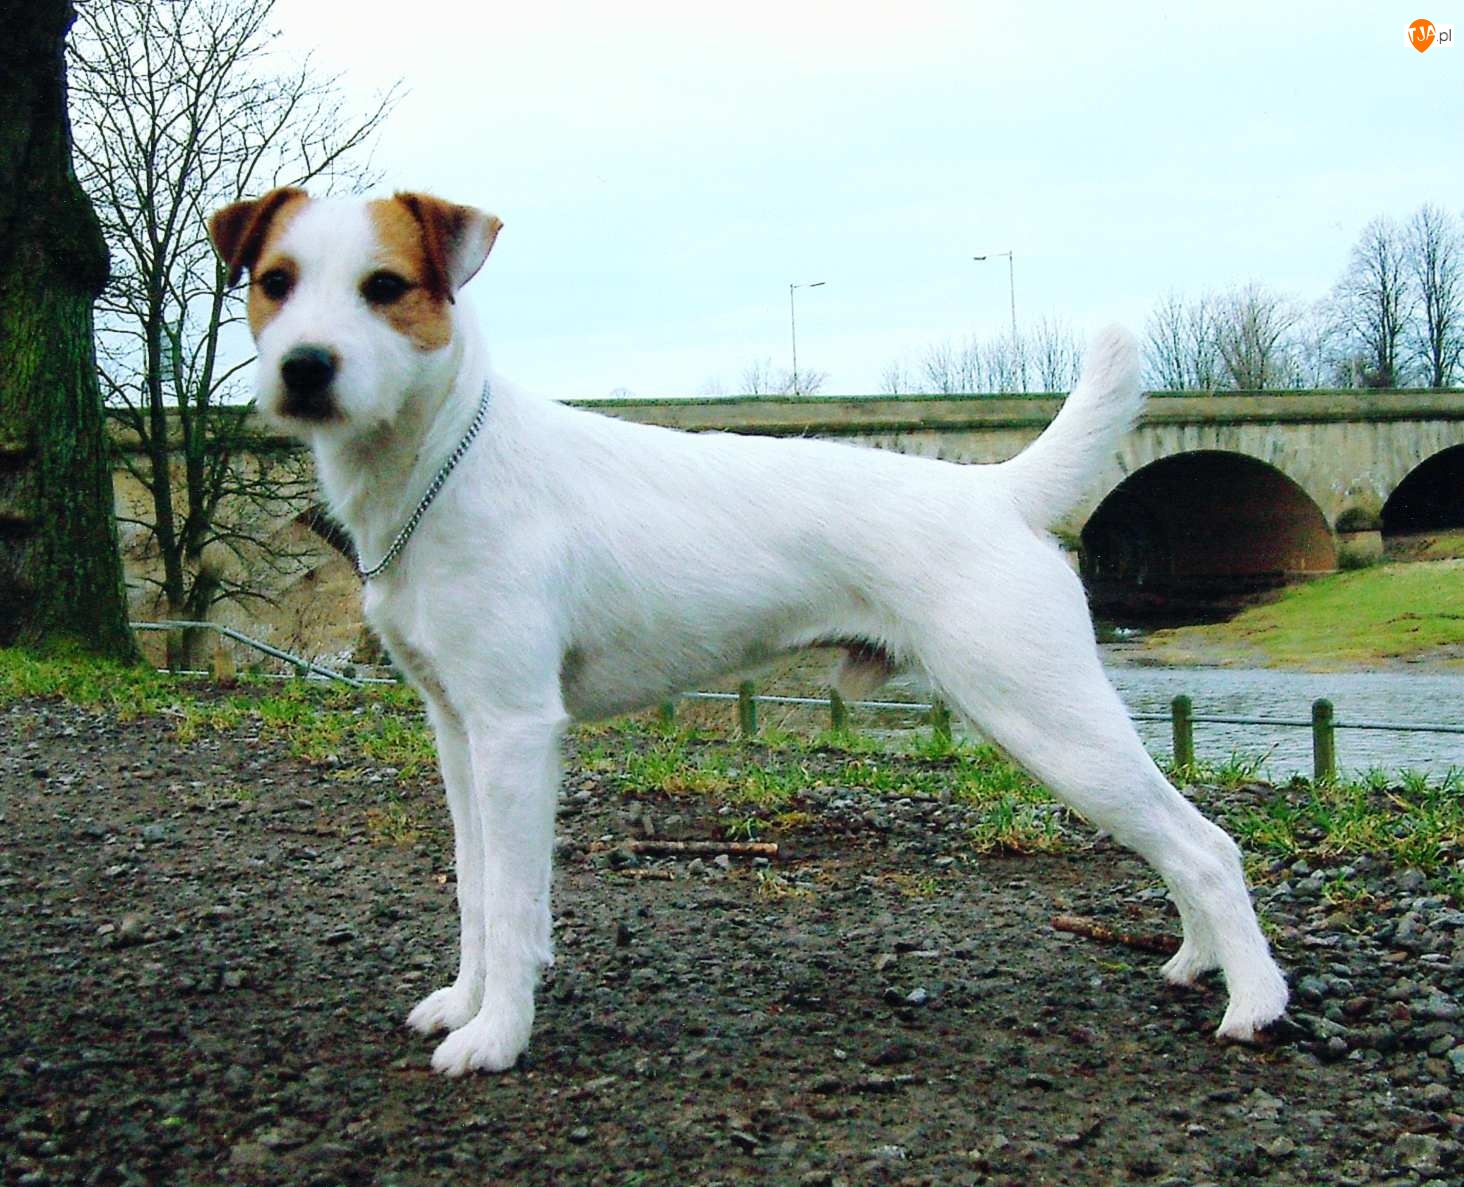 most, Parson Russell Terrier